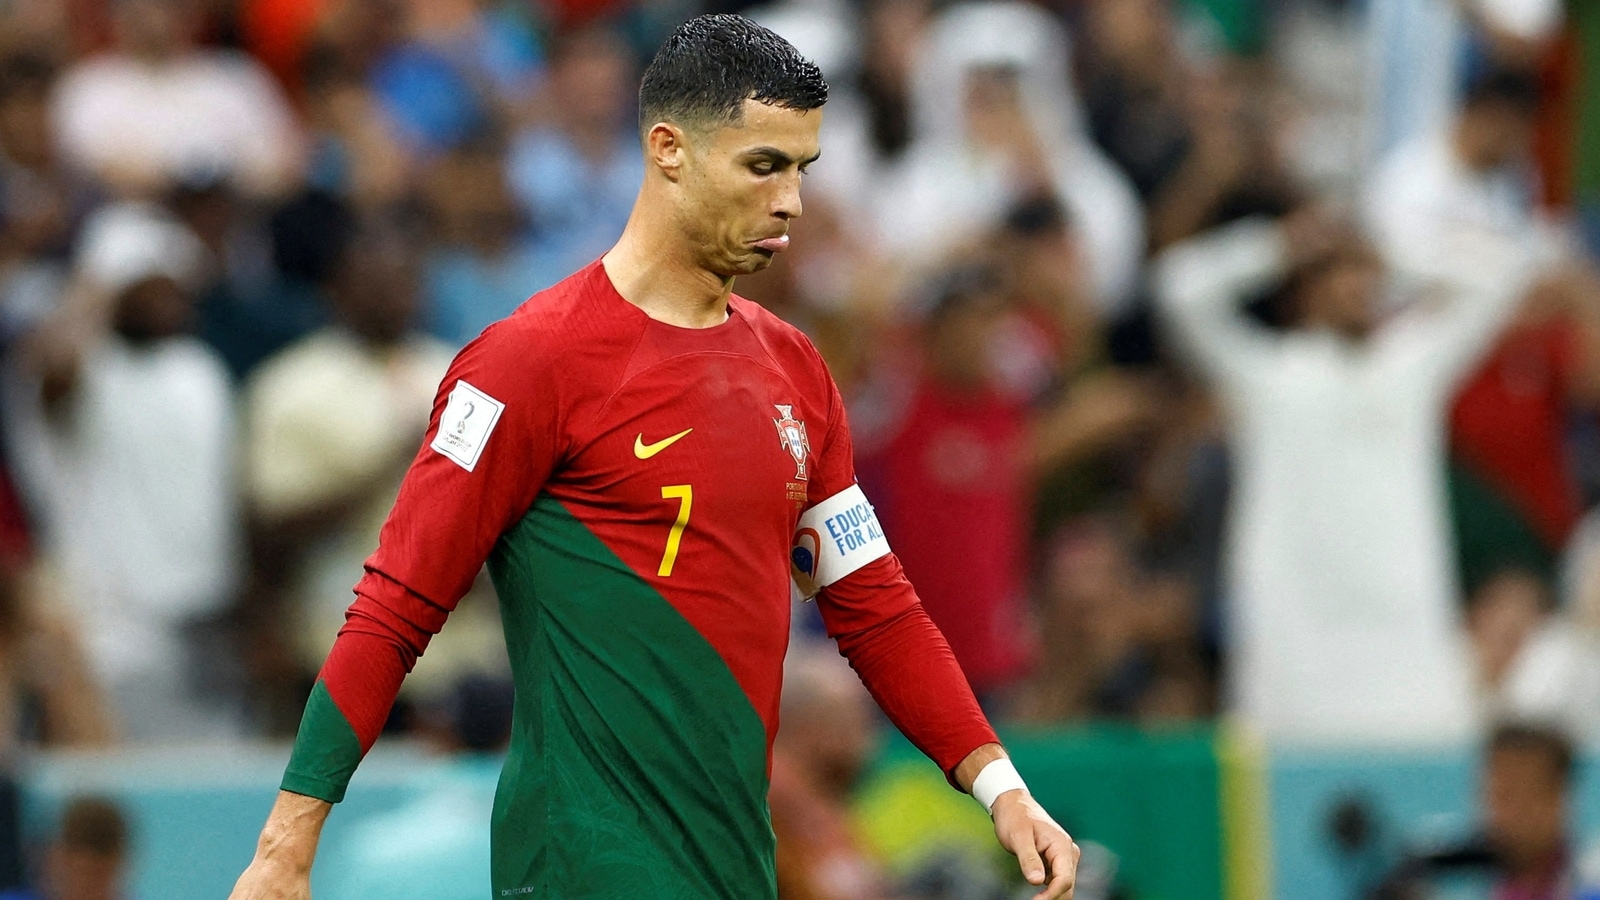 ‘Leave the National Team’: Cristiano Ronaldo’s sister after he was benched vs Switzerland in last 16 of FIFA World Cup